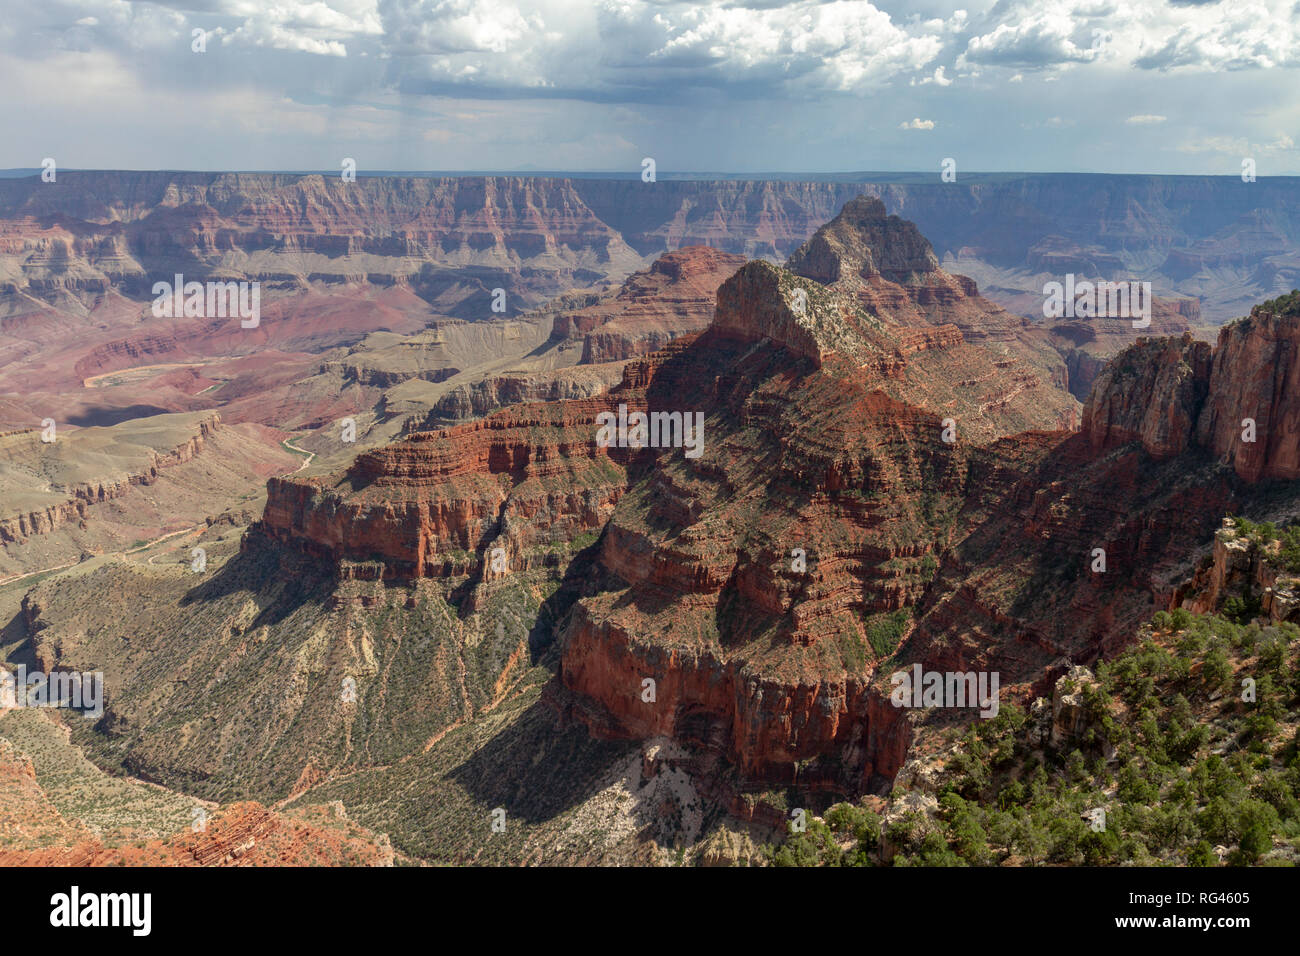 View from Walhalla Overlook viewpoint, Grand Canyon North Rim, Arizona, United States. Stock Photo